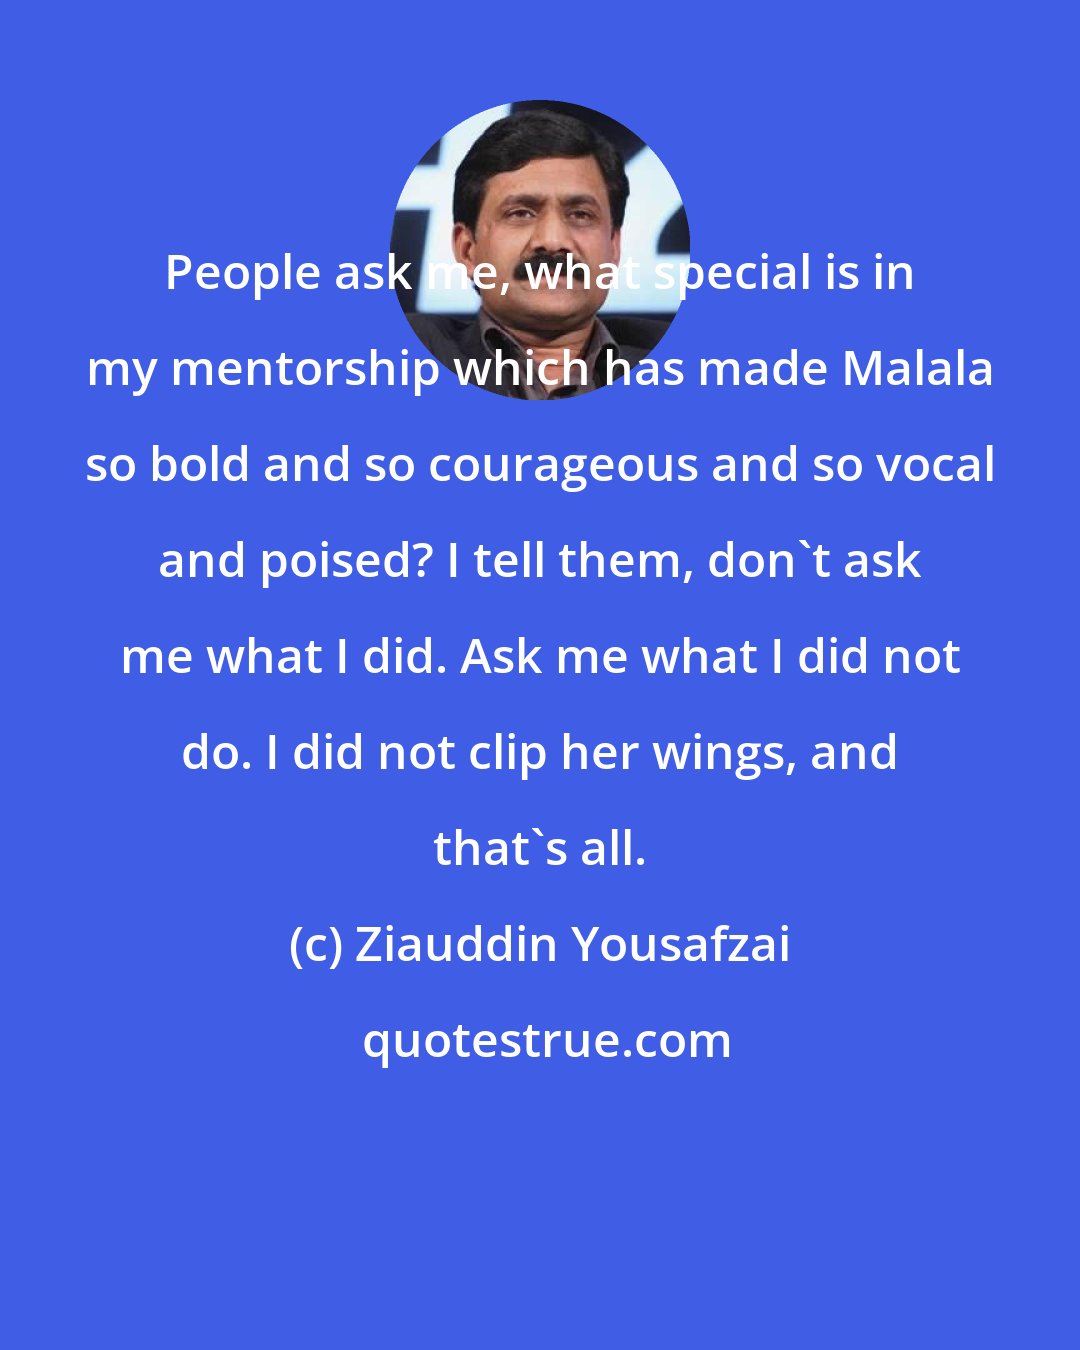 Ziauddin Yousafzai: People ask me, what special is in my mentorship which has made Malala so bold and so courageous and so vocal and poised? I tell them, don't ask me what I did. Ask me what I did not do. I did not clip her wings, and that's all.